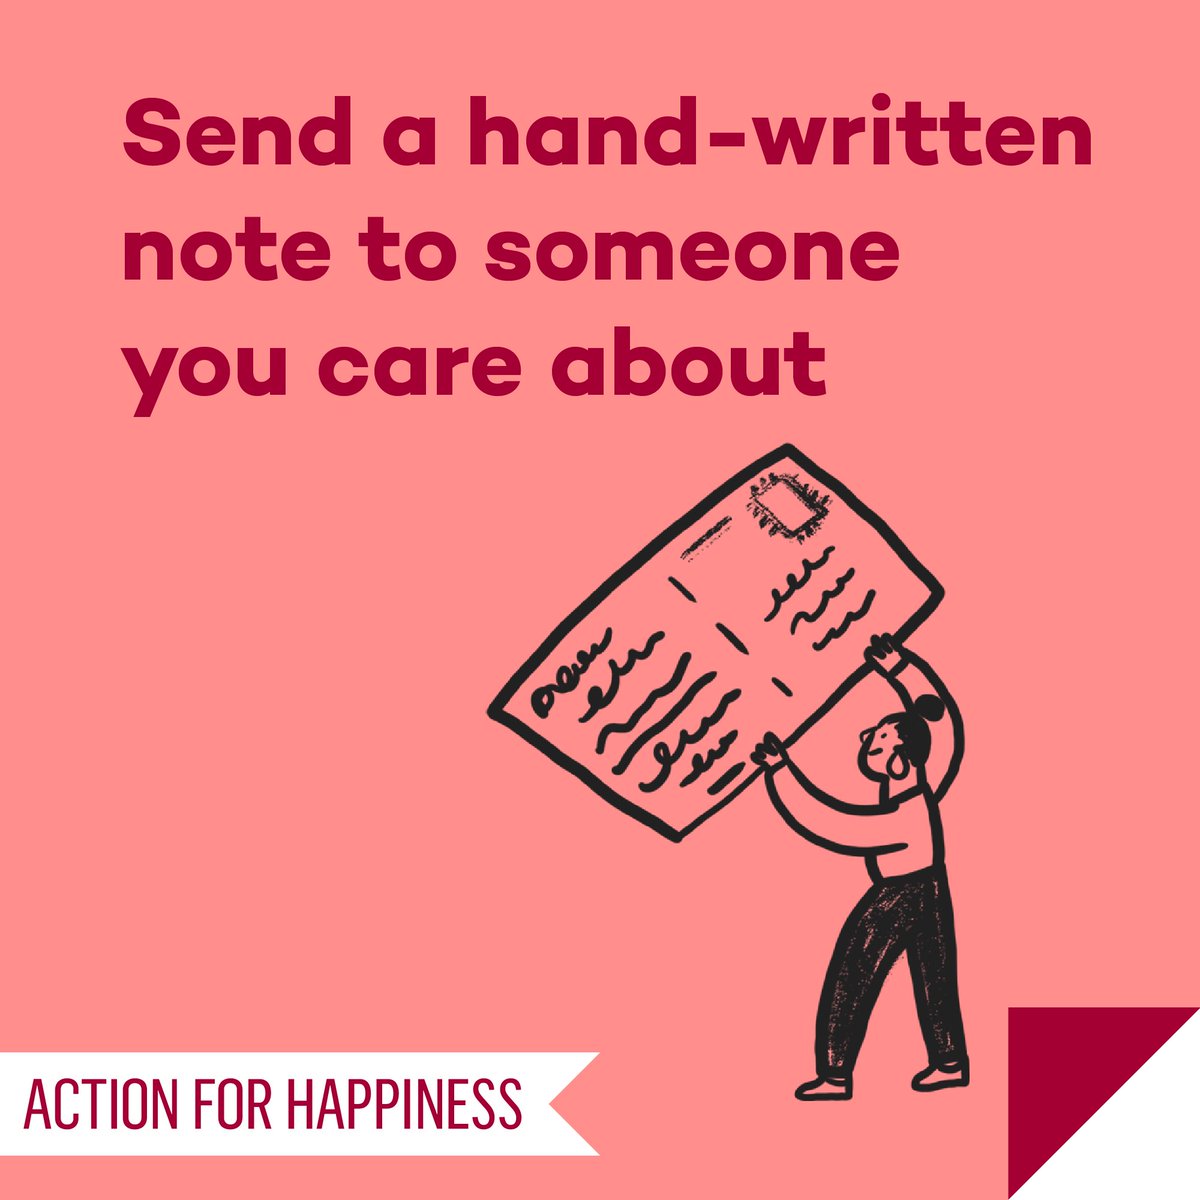 Meaningful May - Day 18: Send a hand-written note to someone you care about actionforhappiness.org/meaningful-may #MeaningfulMay